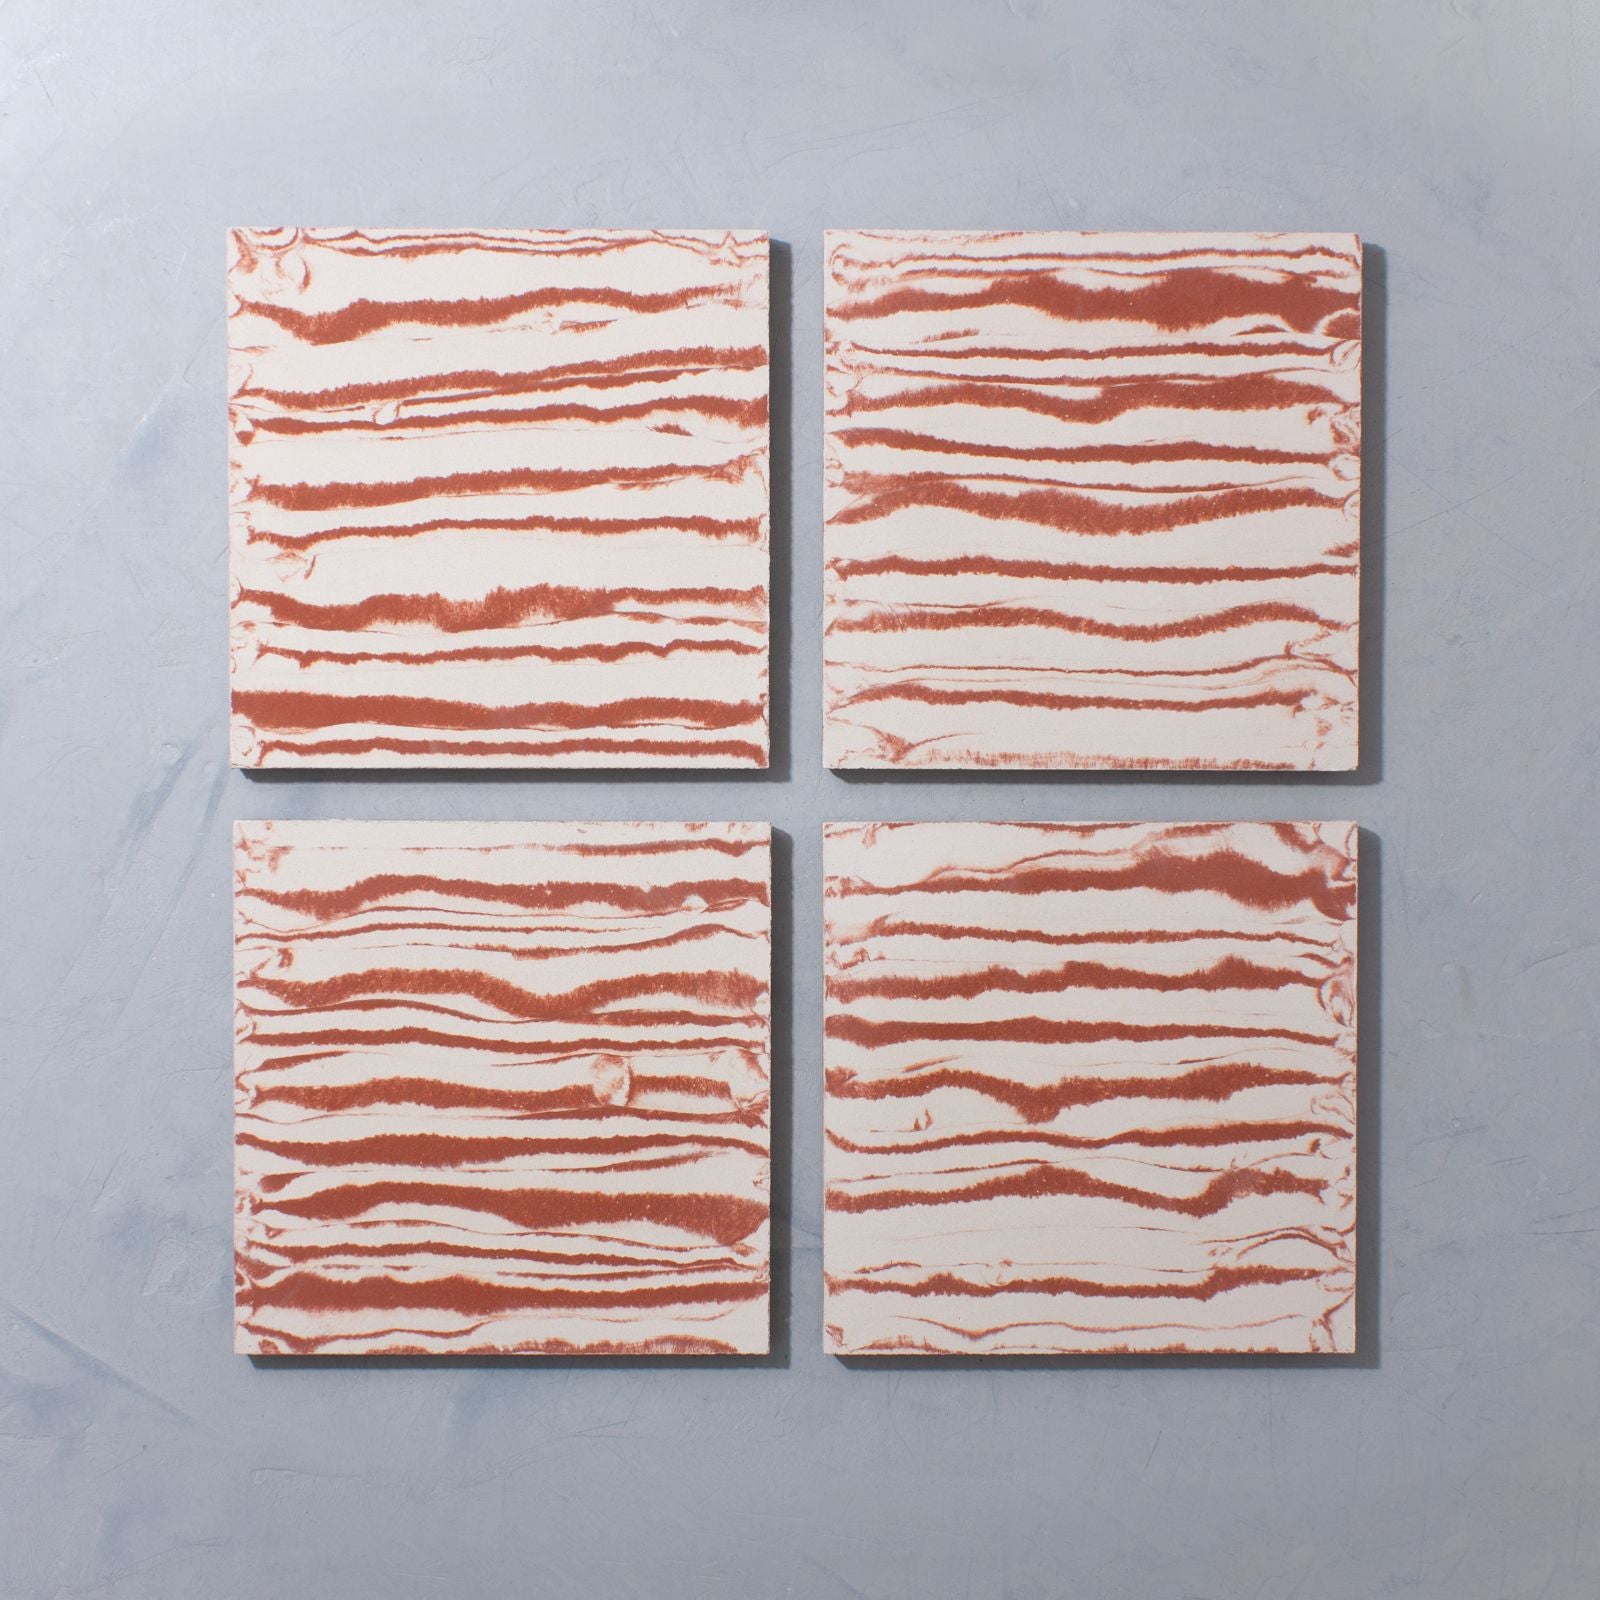 Henry Holland x Bert & May Square Rust Tile